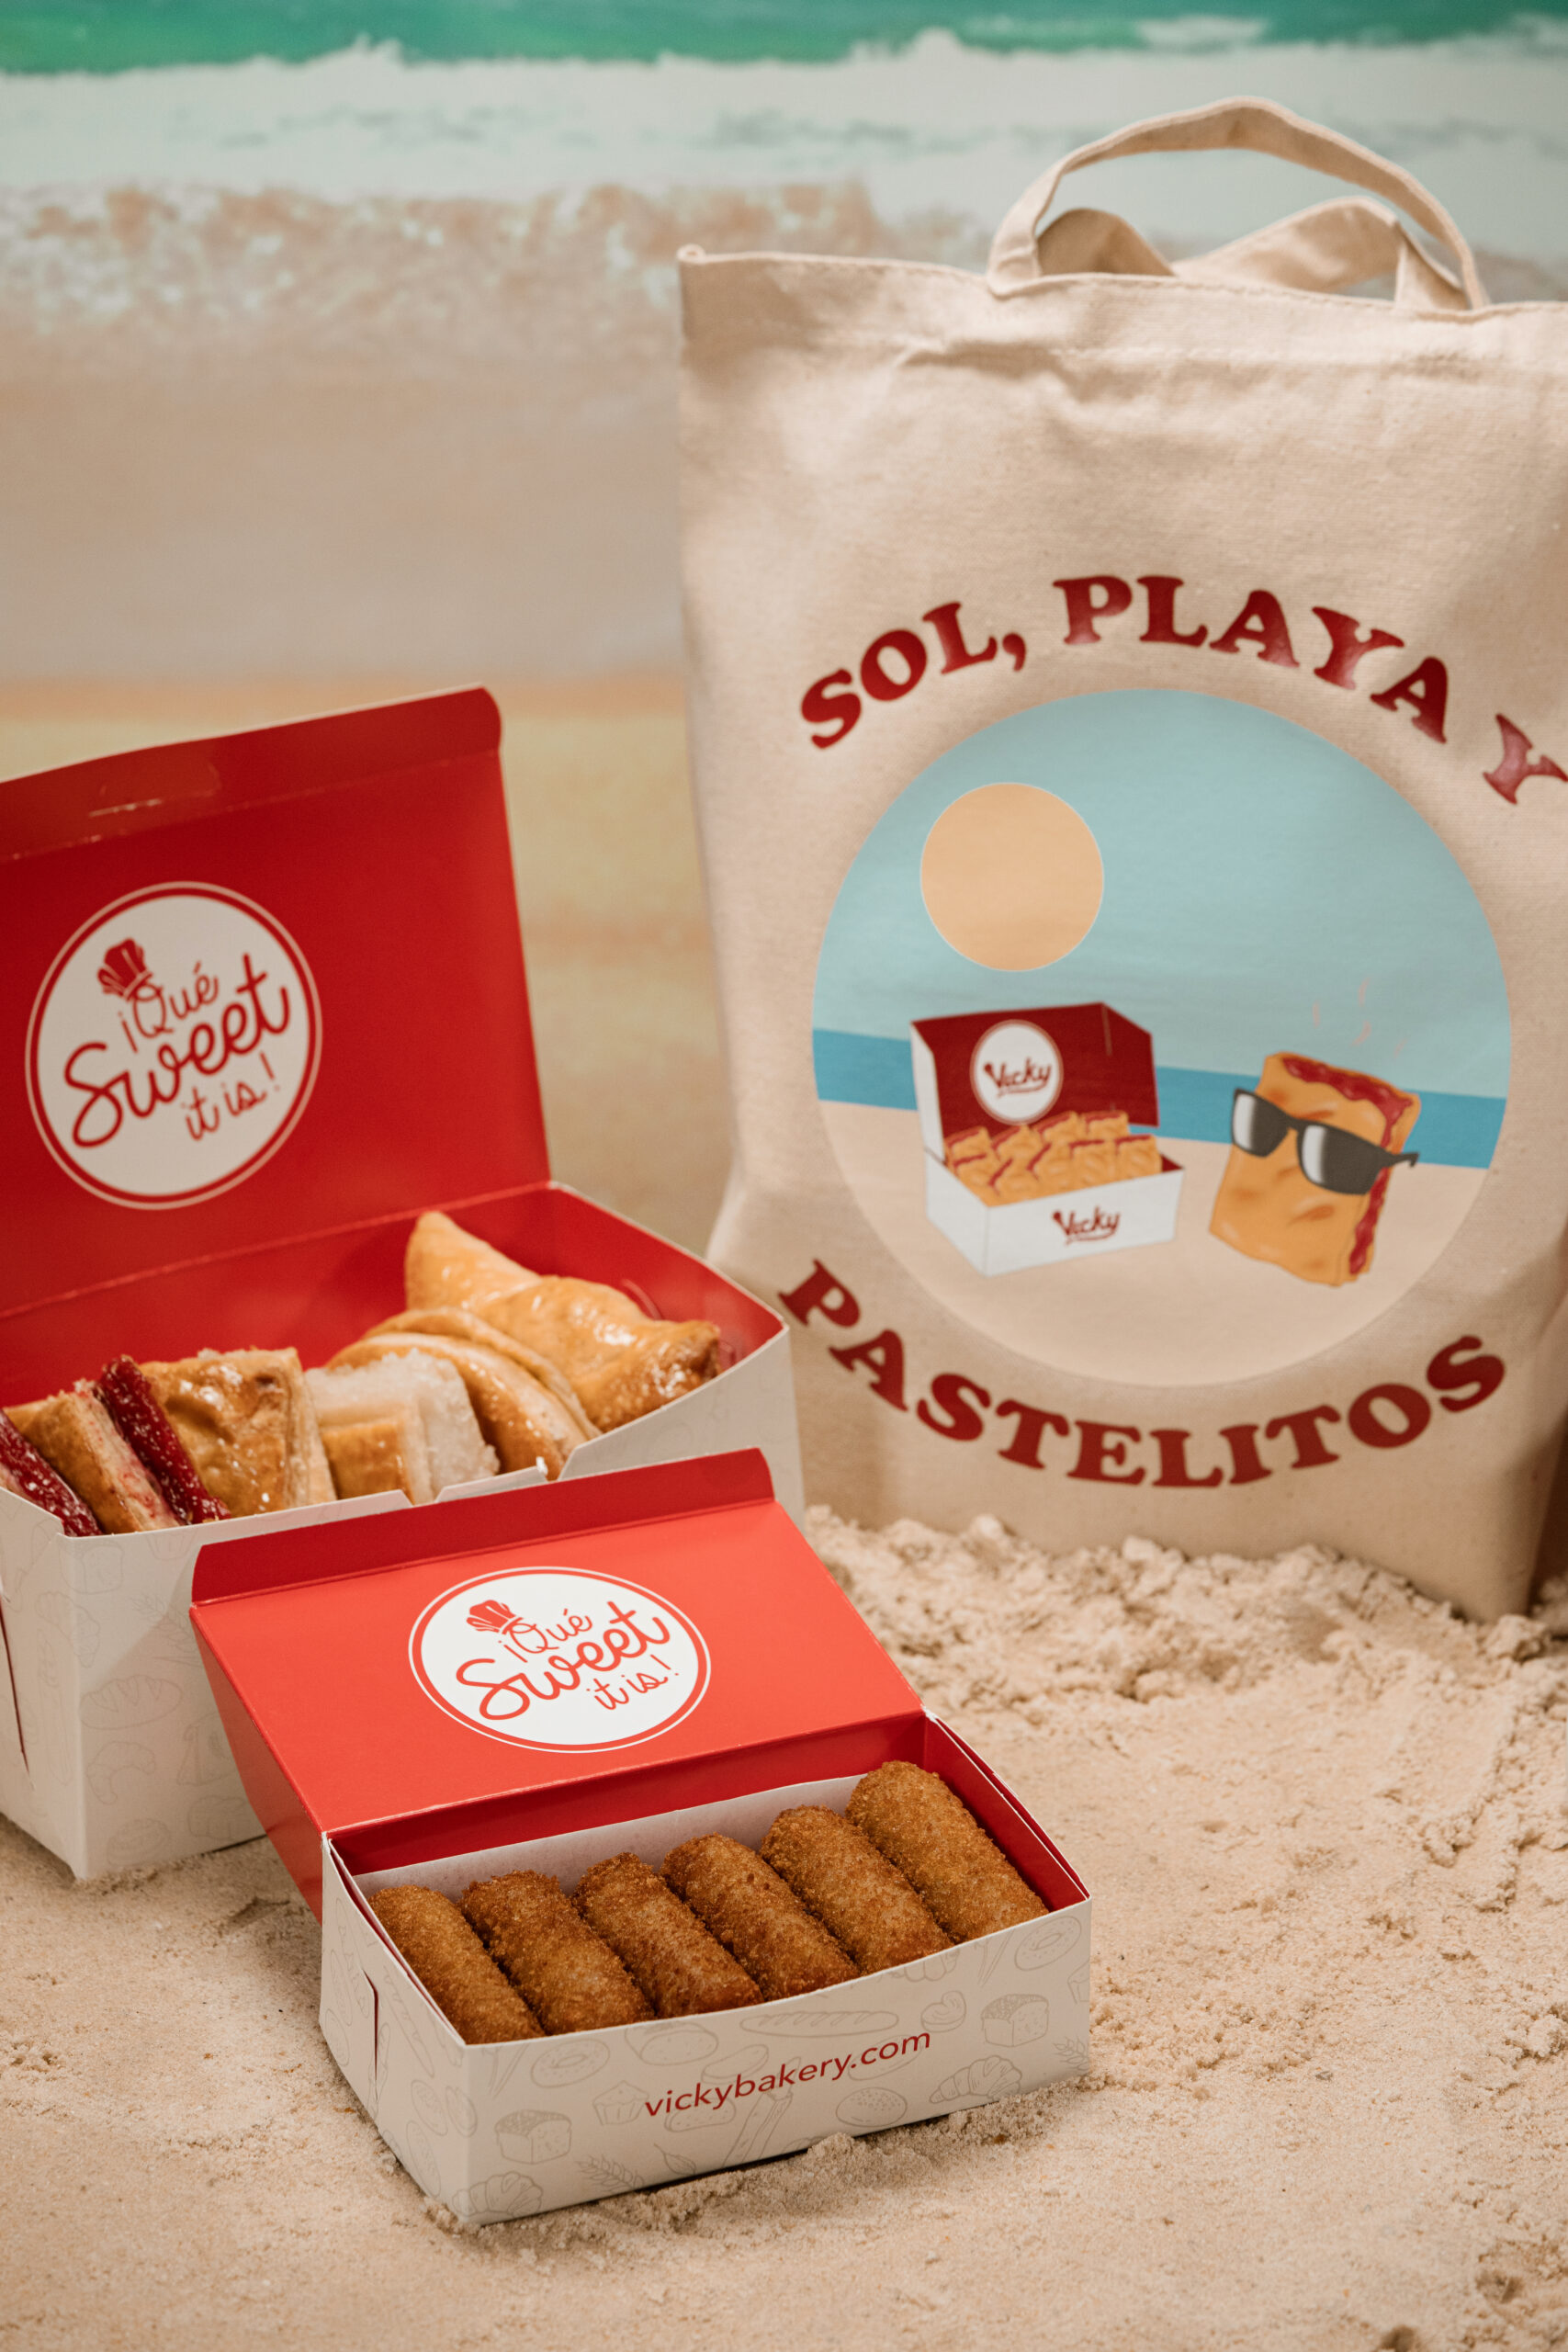 New Limited-Edition Sol, Playa, y Pastelitos Summer Escape Tote Bags Now Available